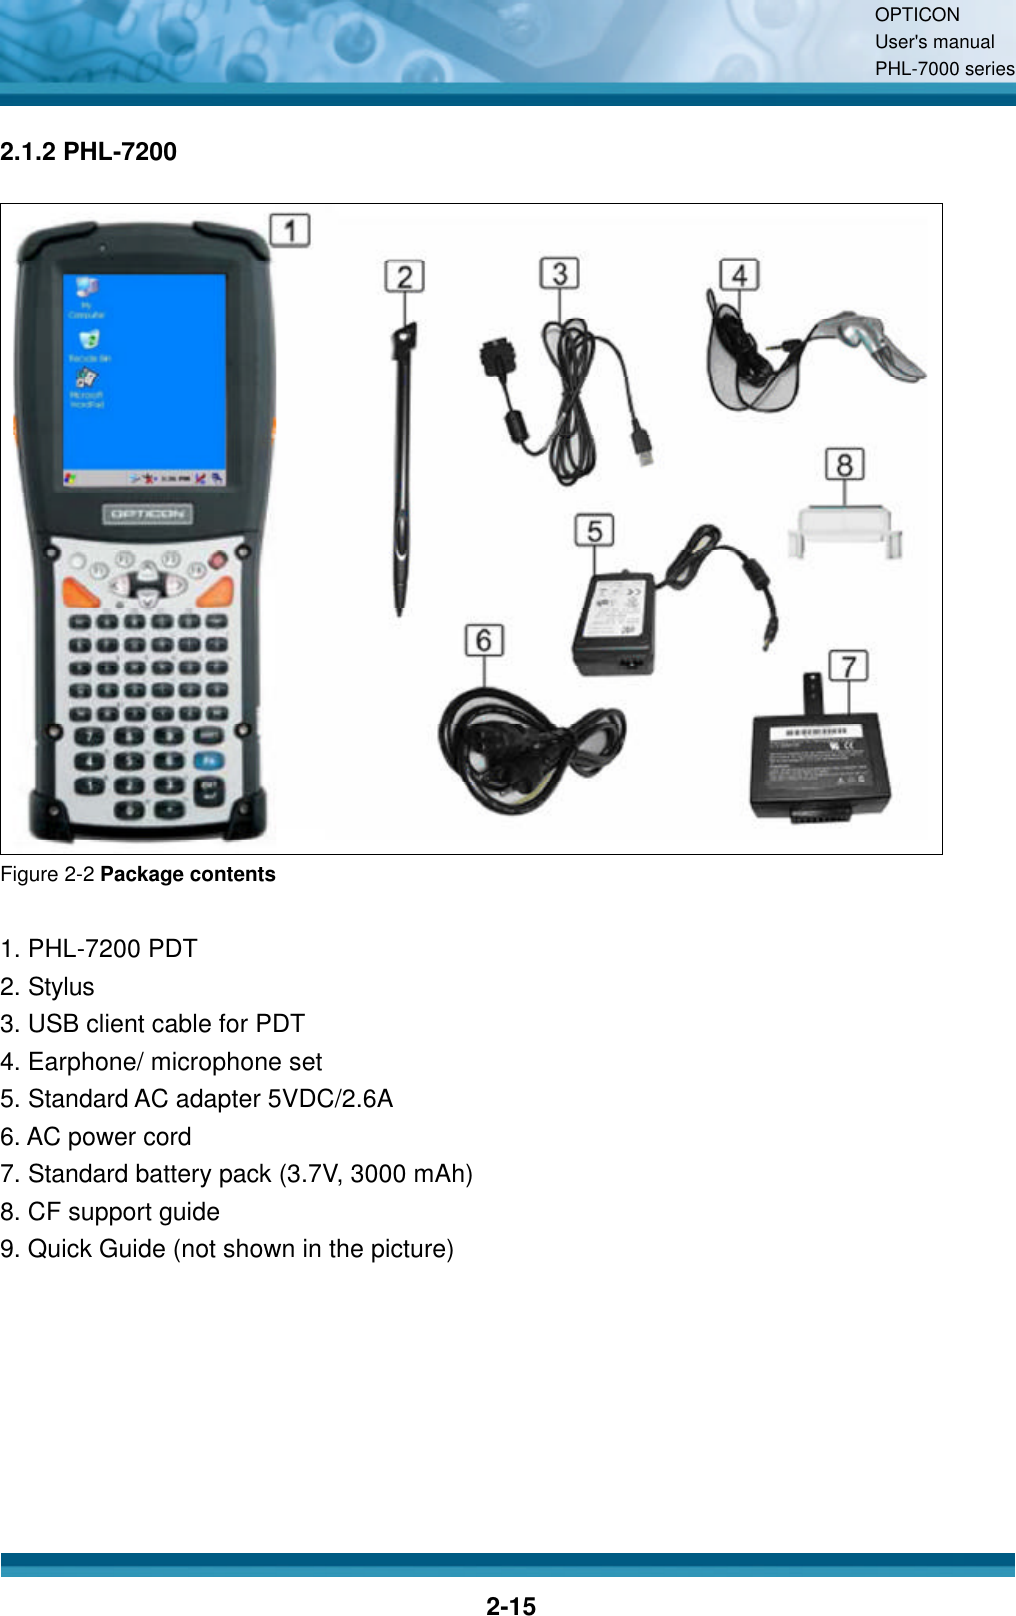 OPTICON User&apos;s manual PHL-7000 series    2-15 2.1.2 PHL-7200   Figure 2-2 Package contents  1. PHL-7200 PDT 2. Stylus 3. USB client cable for PDT 4. Earphone/ microphone set 5. Standard AC adapter 5VDC/2.6A 6. AC power cord 7. Standard battery pack (3.7V, 3000 mAh) 8. CF support guide 9. Quick Guide (not shown in the picture) 